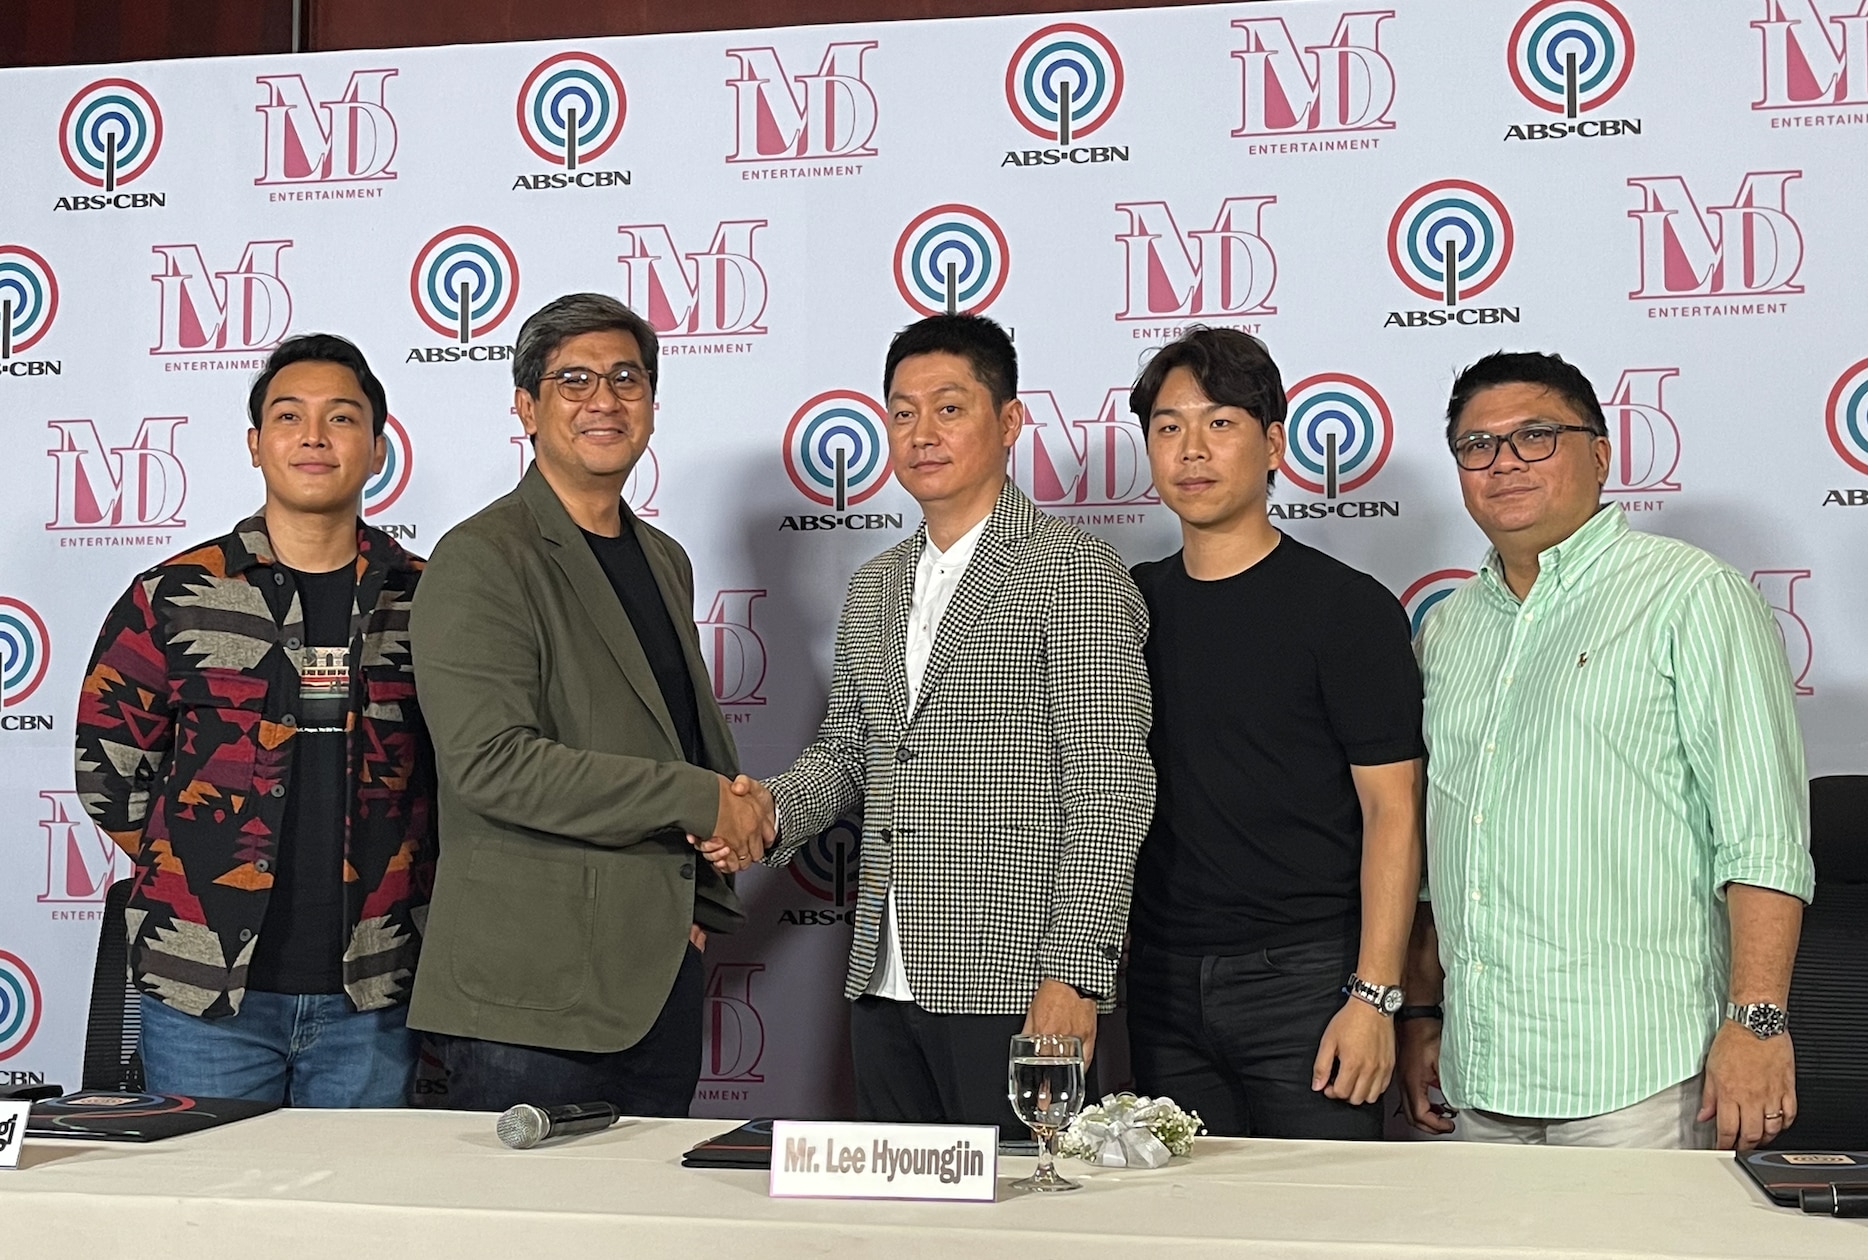 ABS-CBN partners with MLD Entertainment and Kamp Korea Inc. in search for  the next global